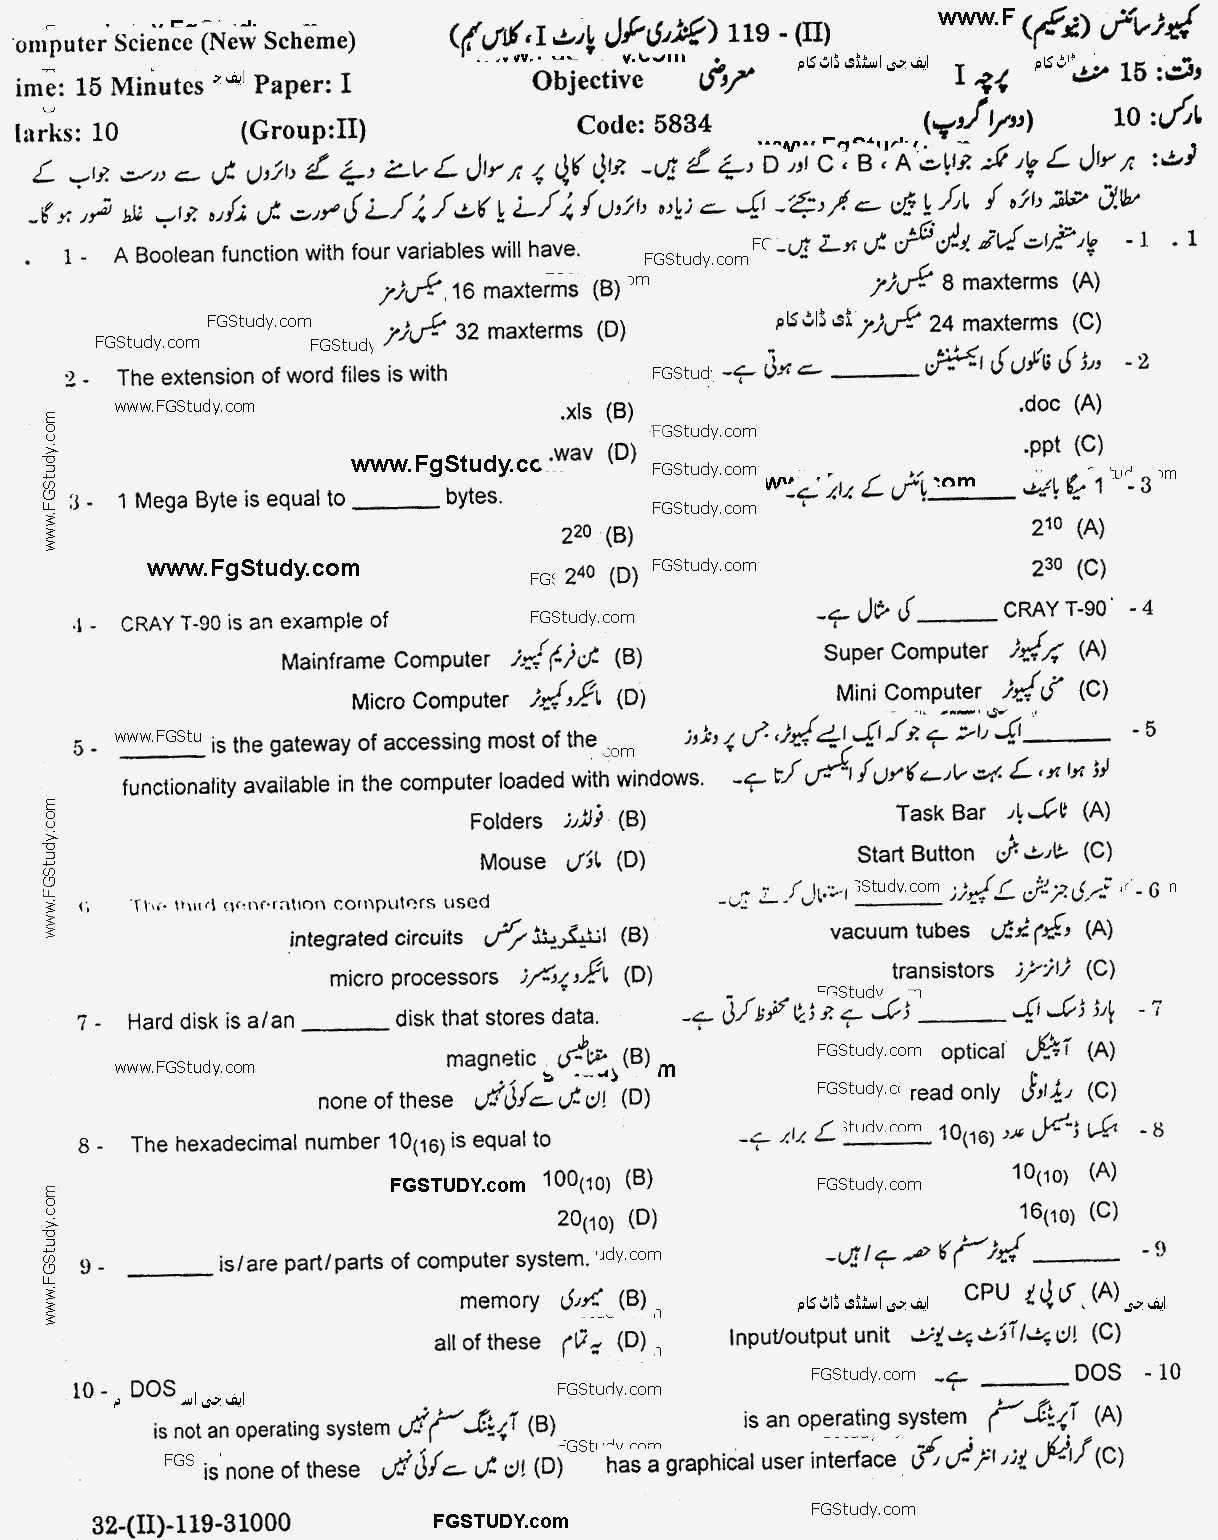 Gujranwala Board Computer Science Objective Group 2 9th Class Past Papers 2019